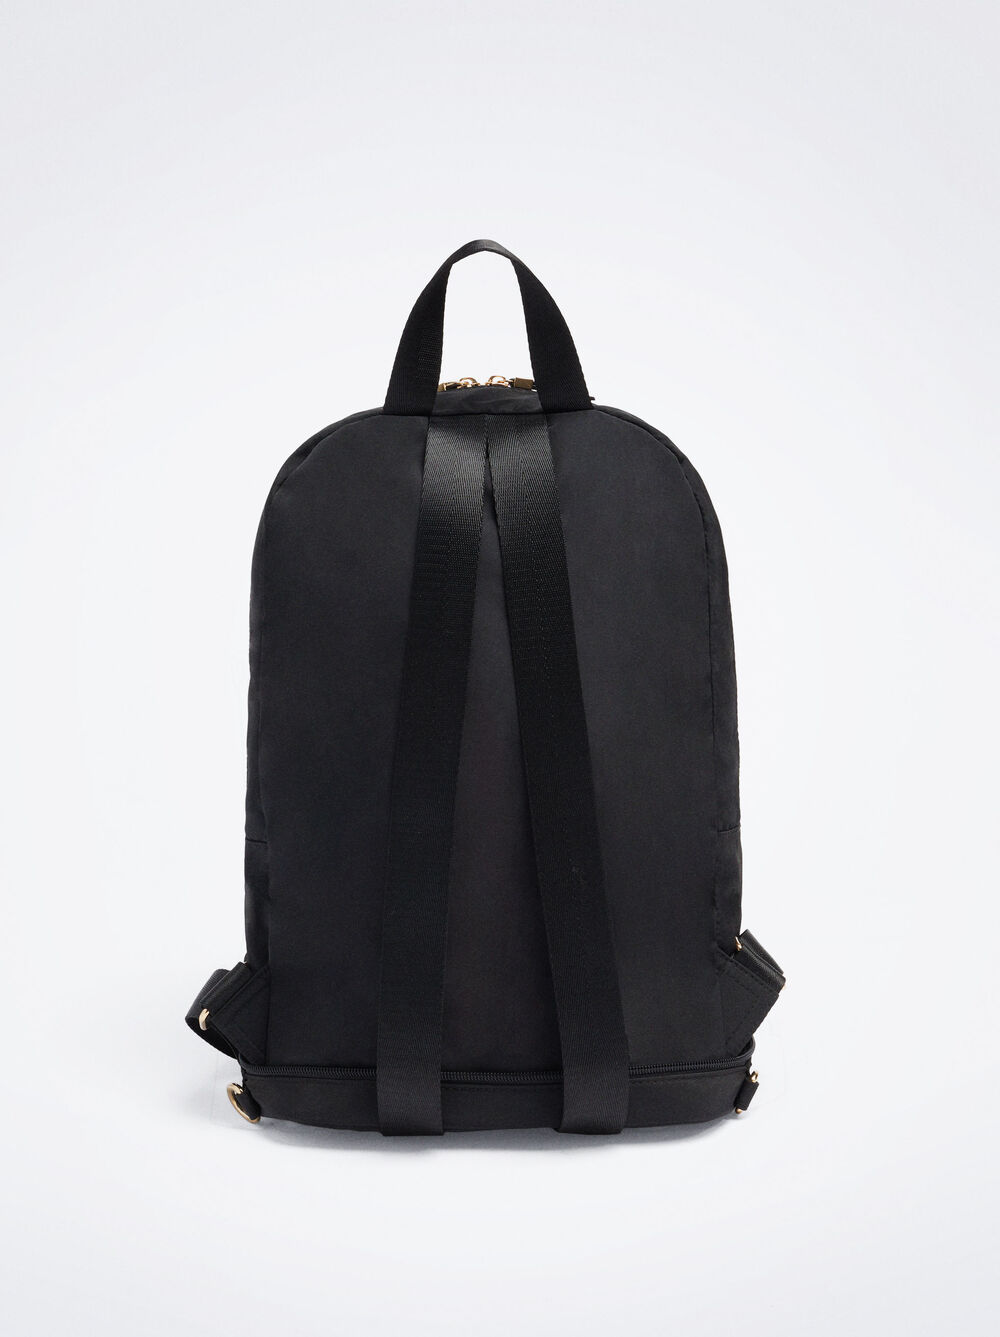 2-In-1 Nylon Backpack And Bag